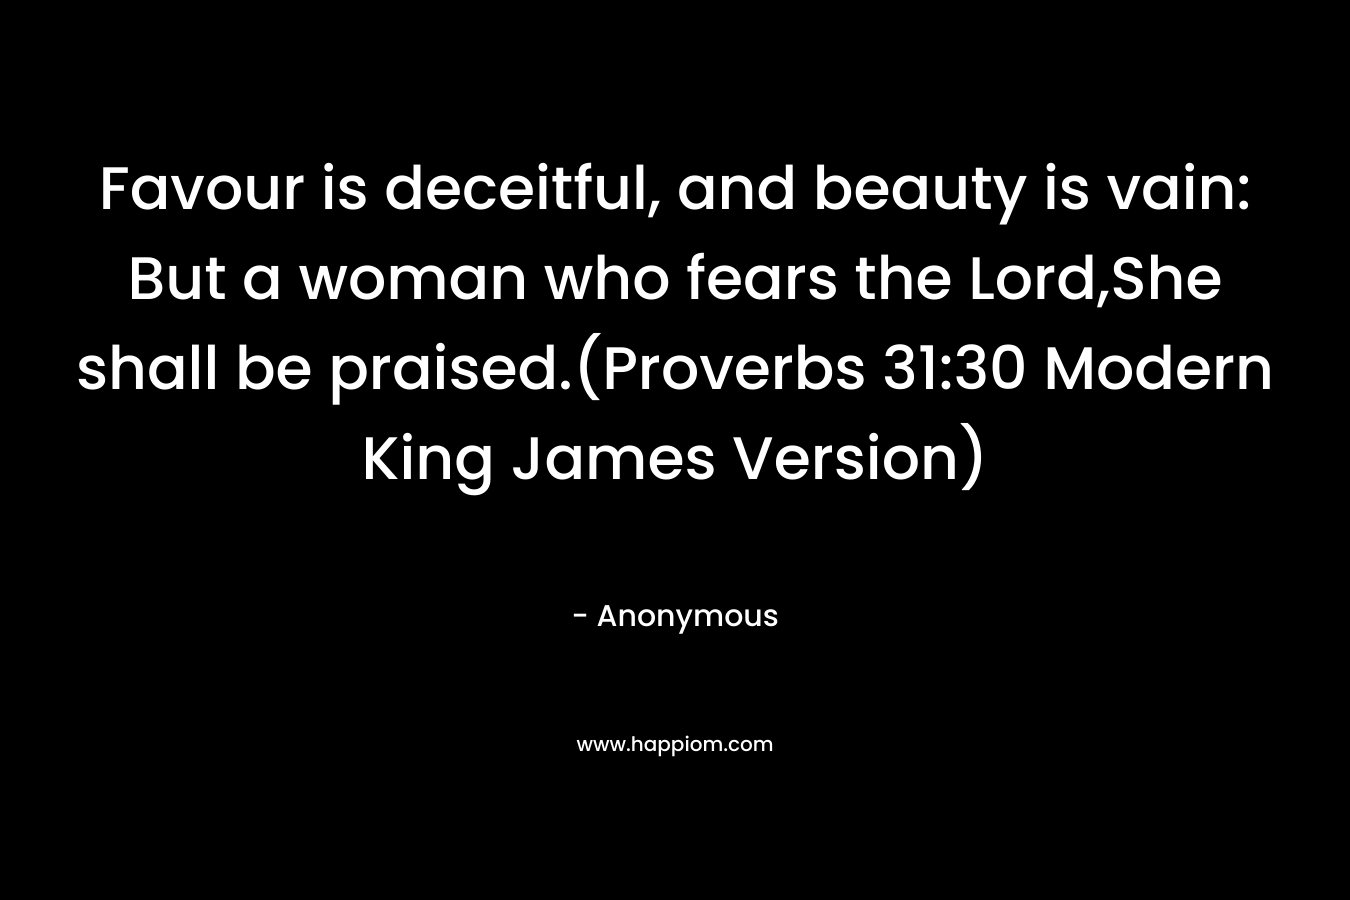 Favour is deceitful, and beauty is vain: But a woman who fears the Lord,She shall be praised.(Proverbs 31:30 Modern King James Version)